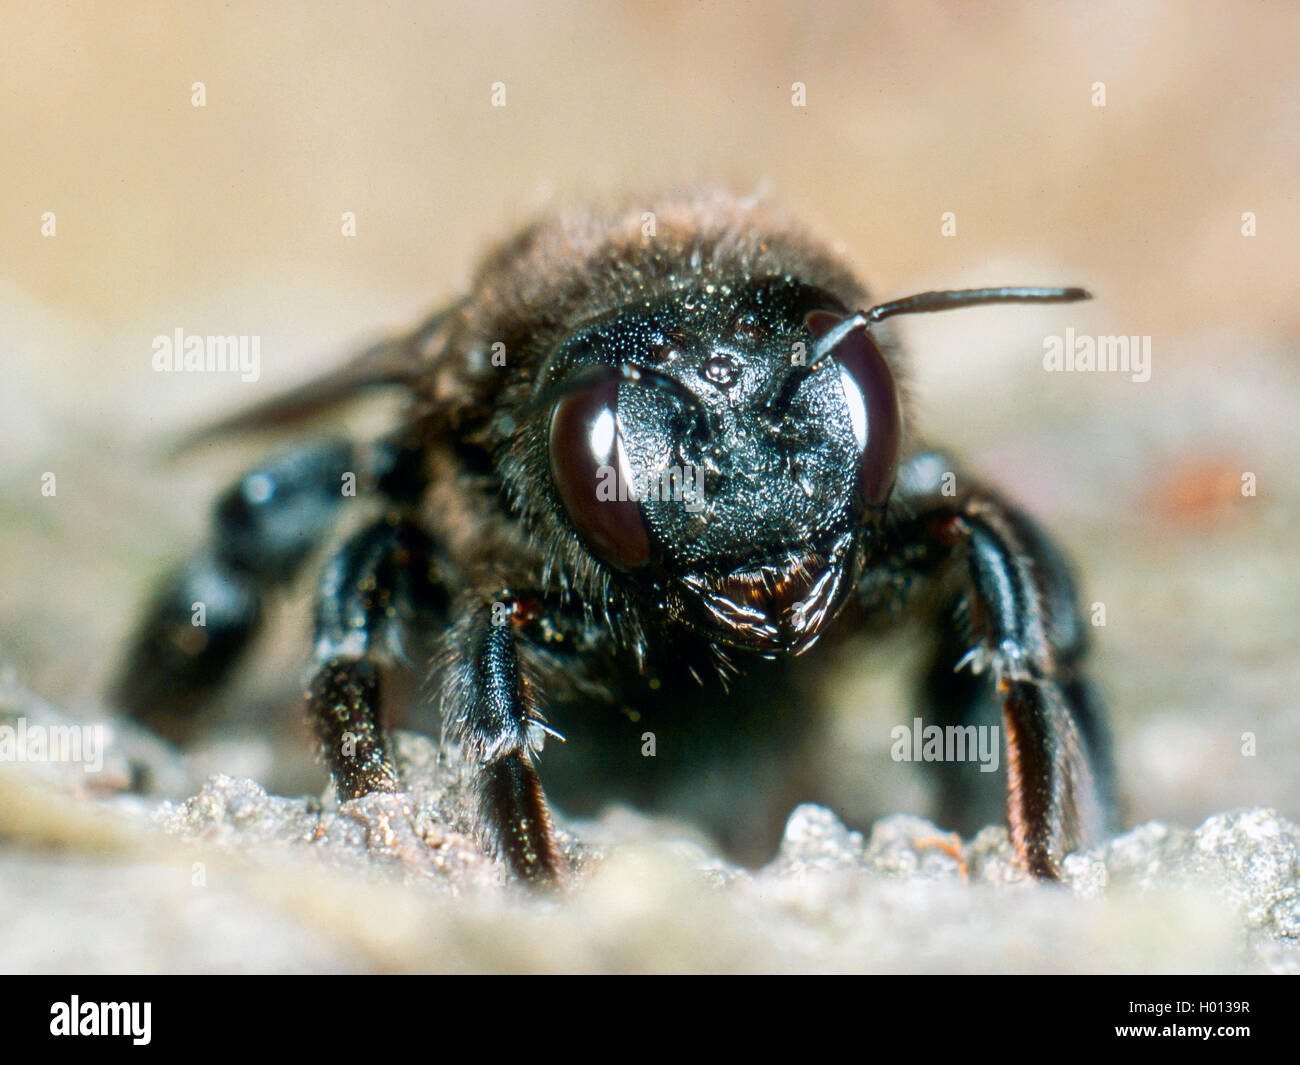 Violet carpenter bee (Xylocopa violacea), female, Germany Stock Photo